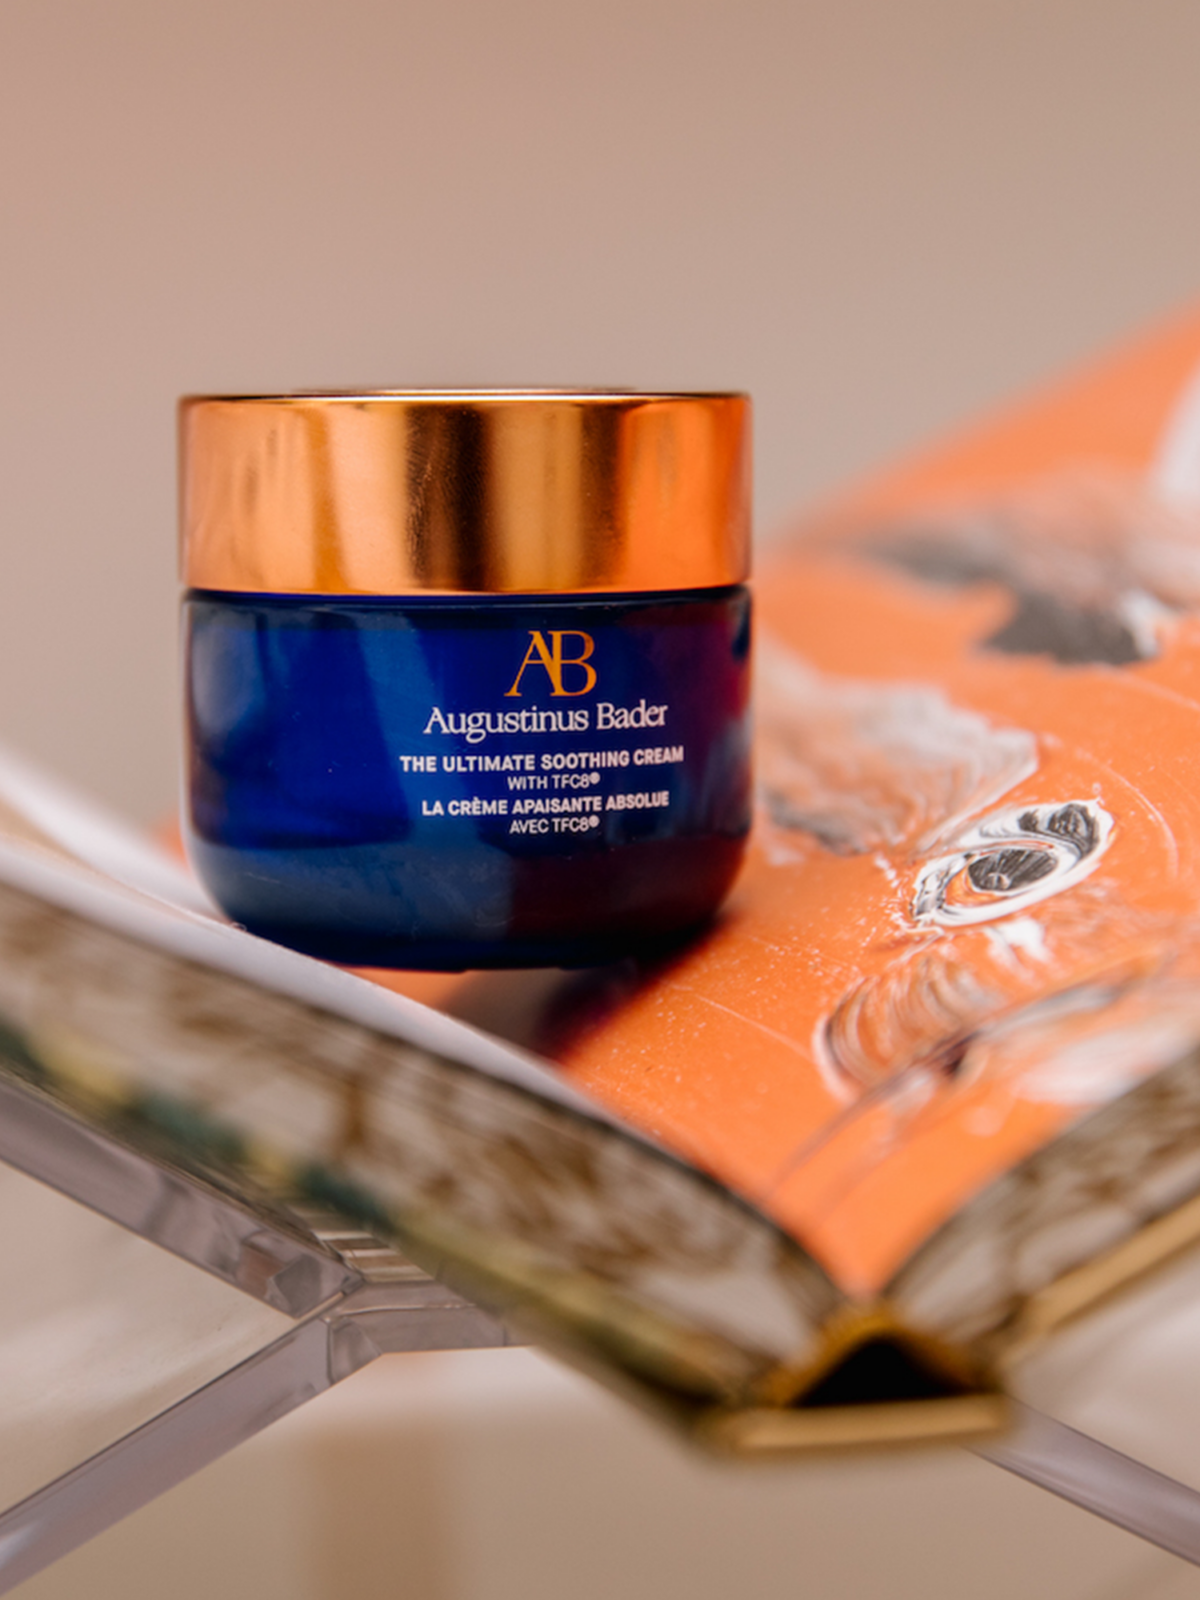 Augustinus Bader Review: The Ultimate Soothing Cream